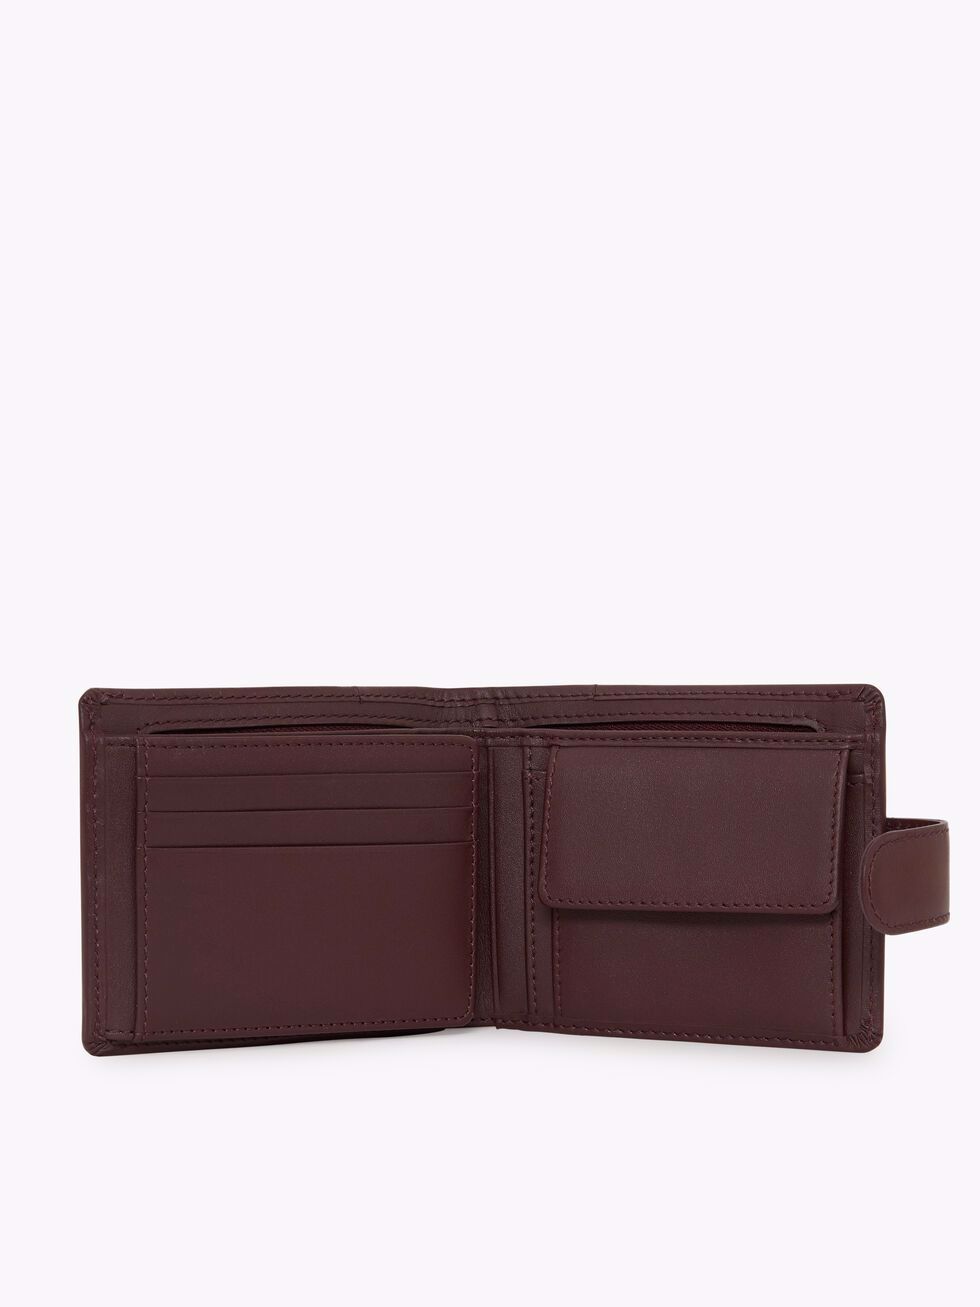 Boots Online. RM Williams Wallet With Coin Pocket CG256